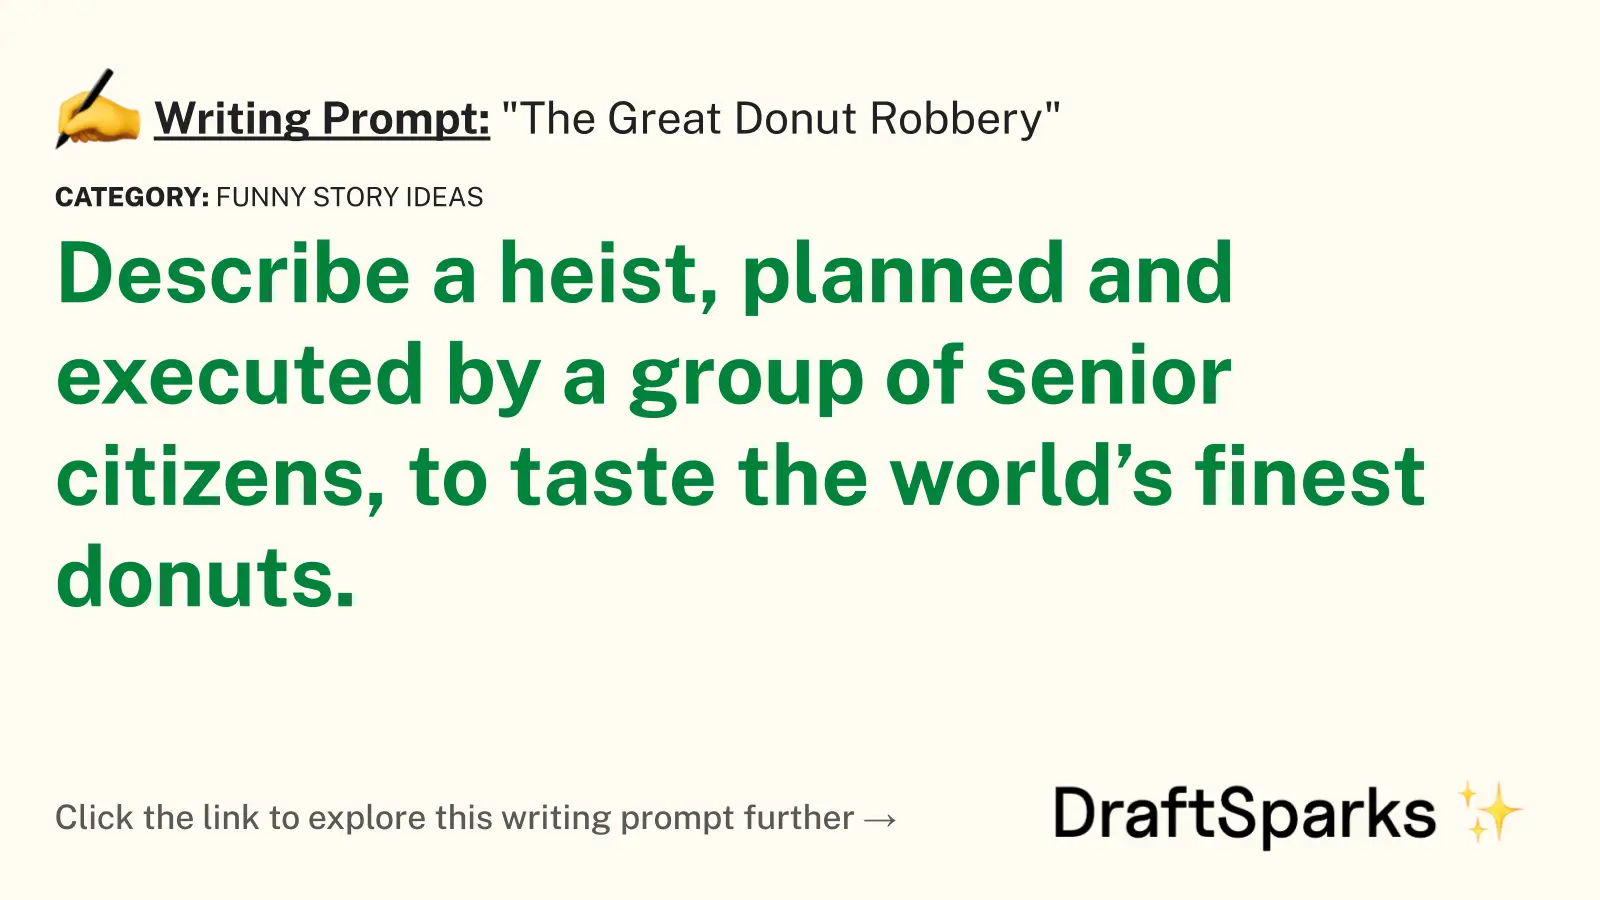 “The Great Donut Robbery”